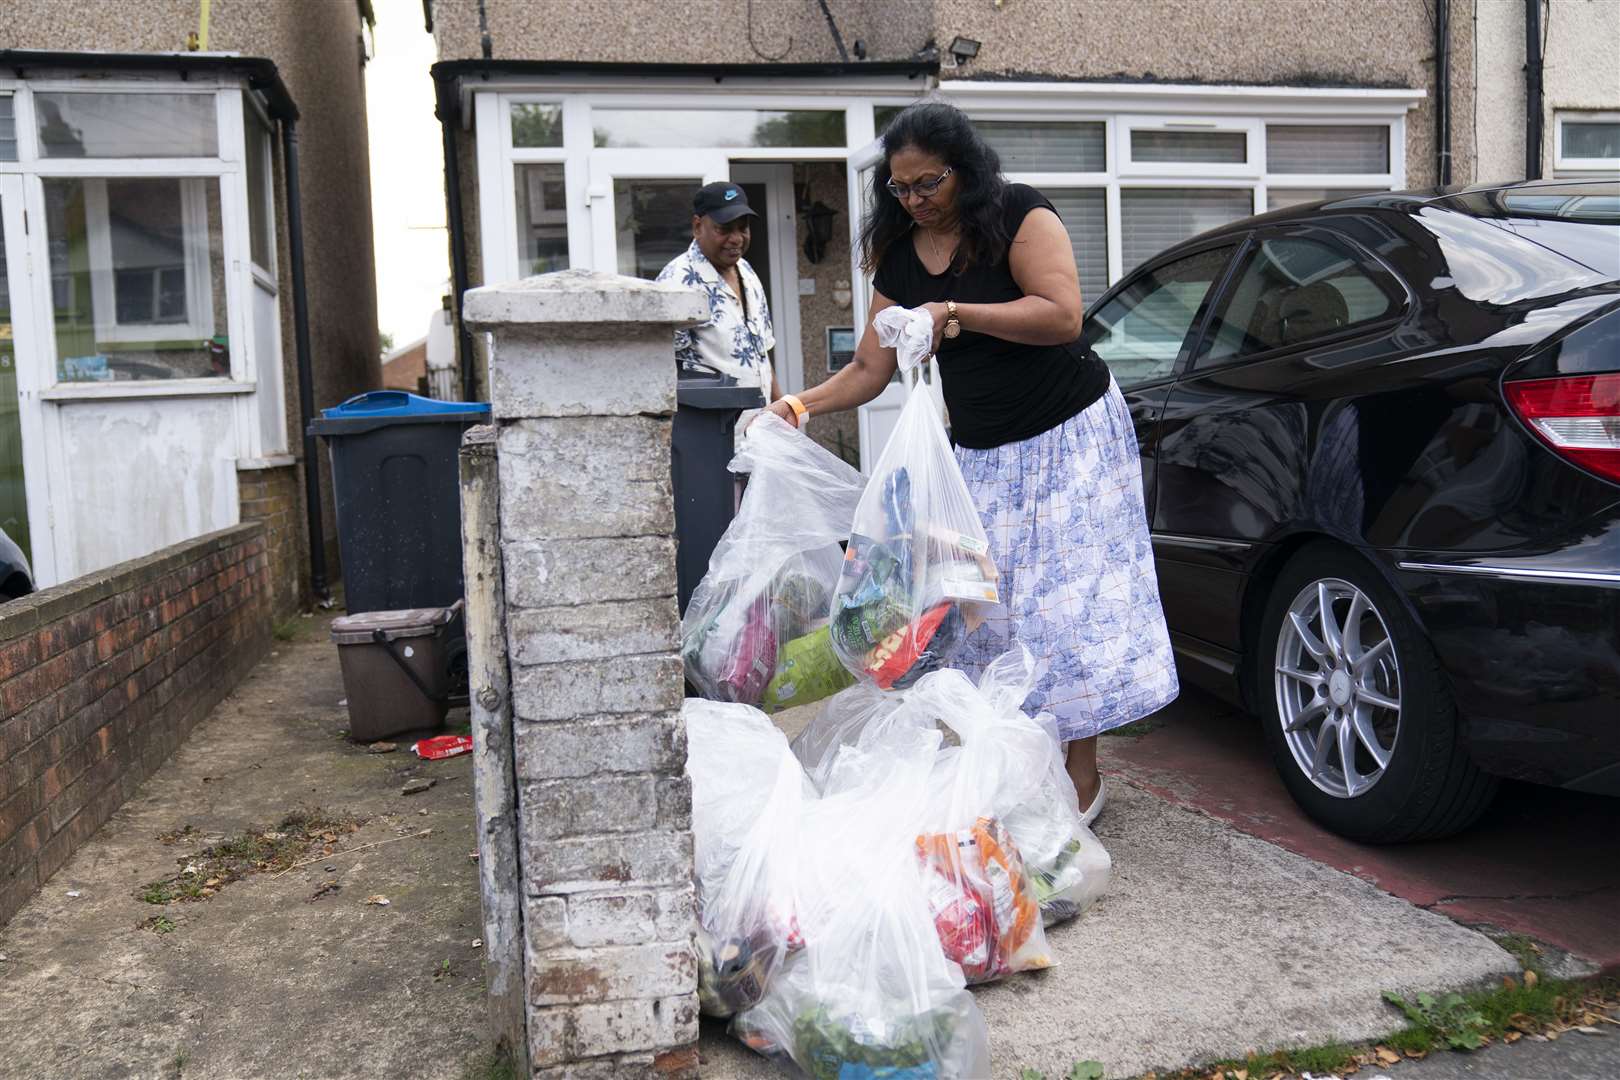 Residents Rose and Kes Bala dispose of spoiled food on their return home (Kirsty O’Connor/PA)